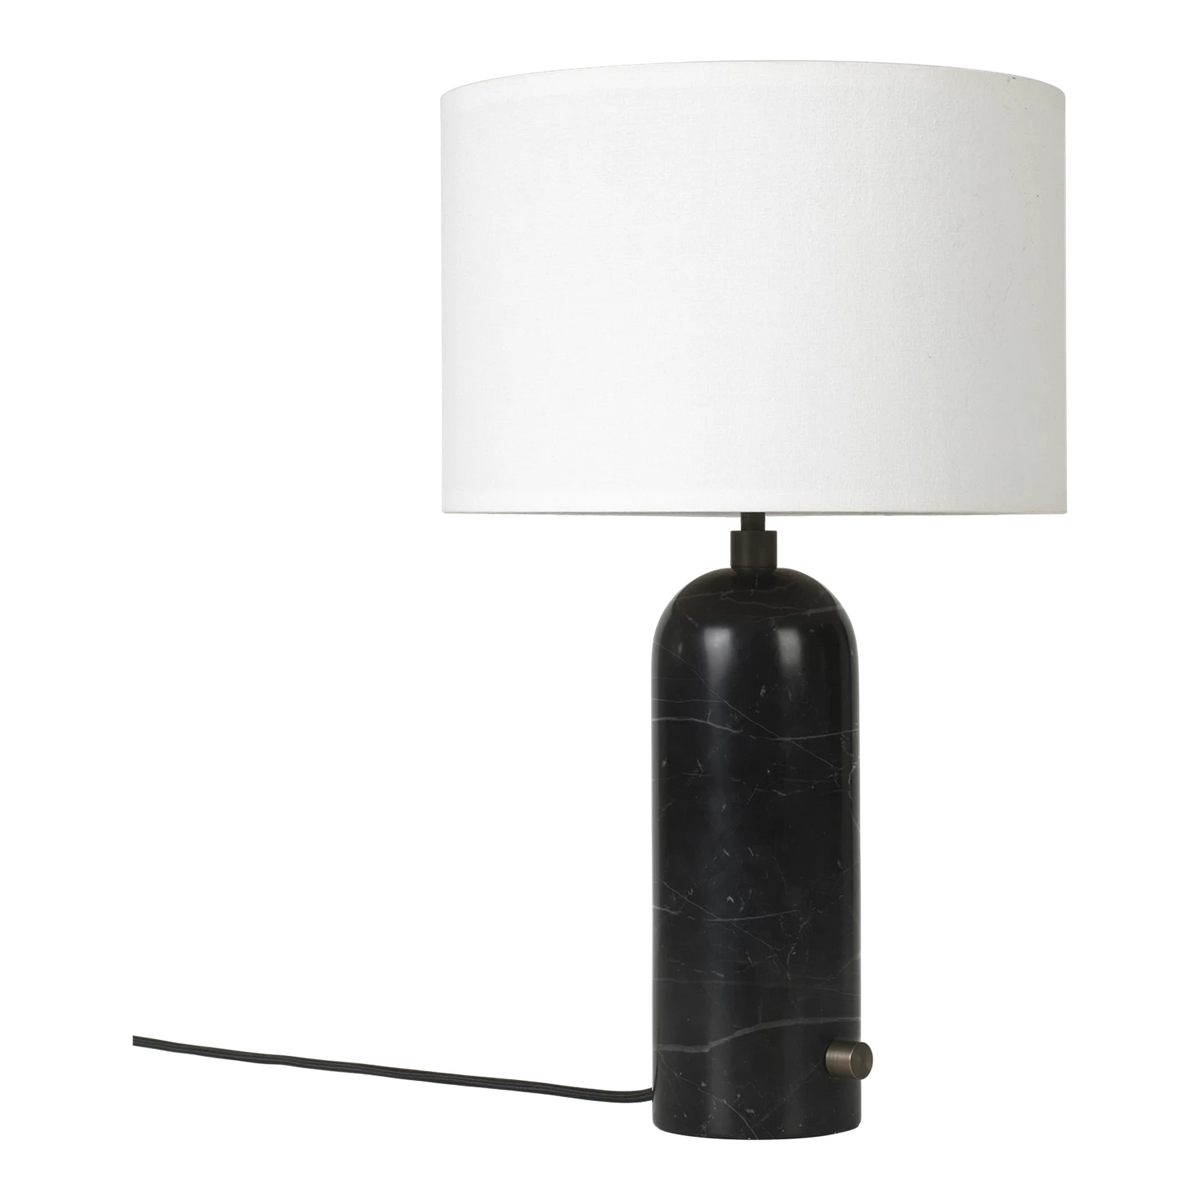 Gravity Table Lamp by Gubi